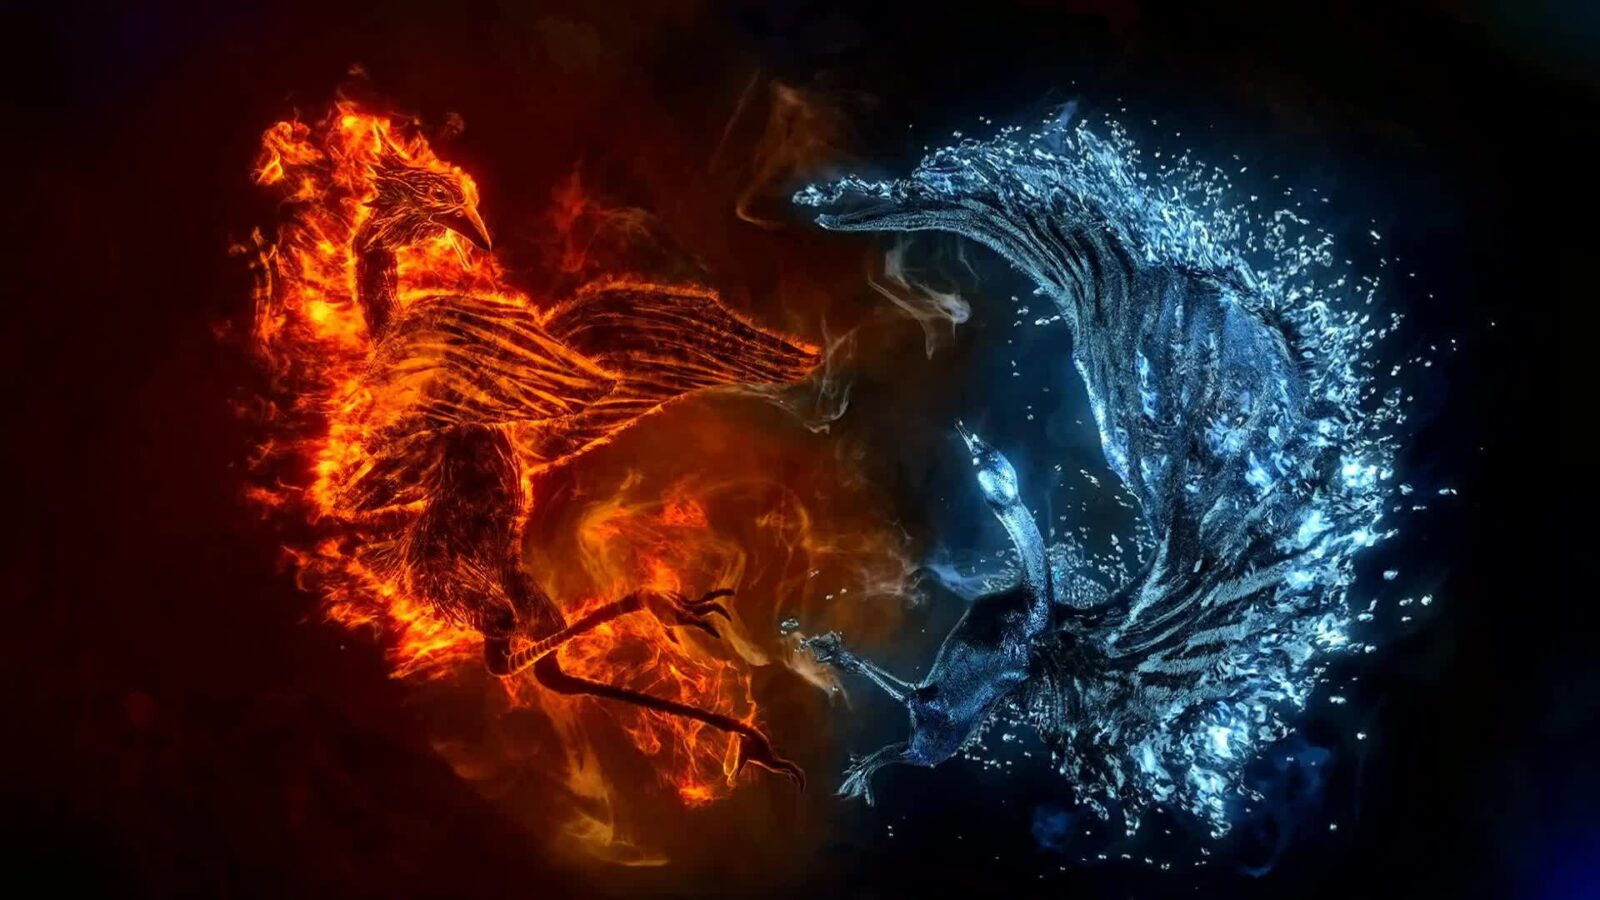 LiveWallpapers4Free.com | Ice And Flame Abstract Fantasy Artwork - Desktop Animated Wallpaper